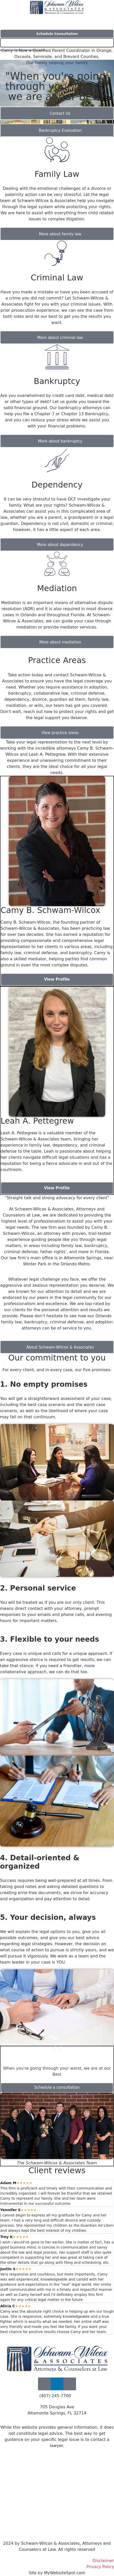 Schwam-Wilcox & Associates, Attorneys and Counselors at Law - South Daytona FL Lawyers